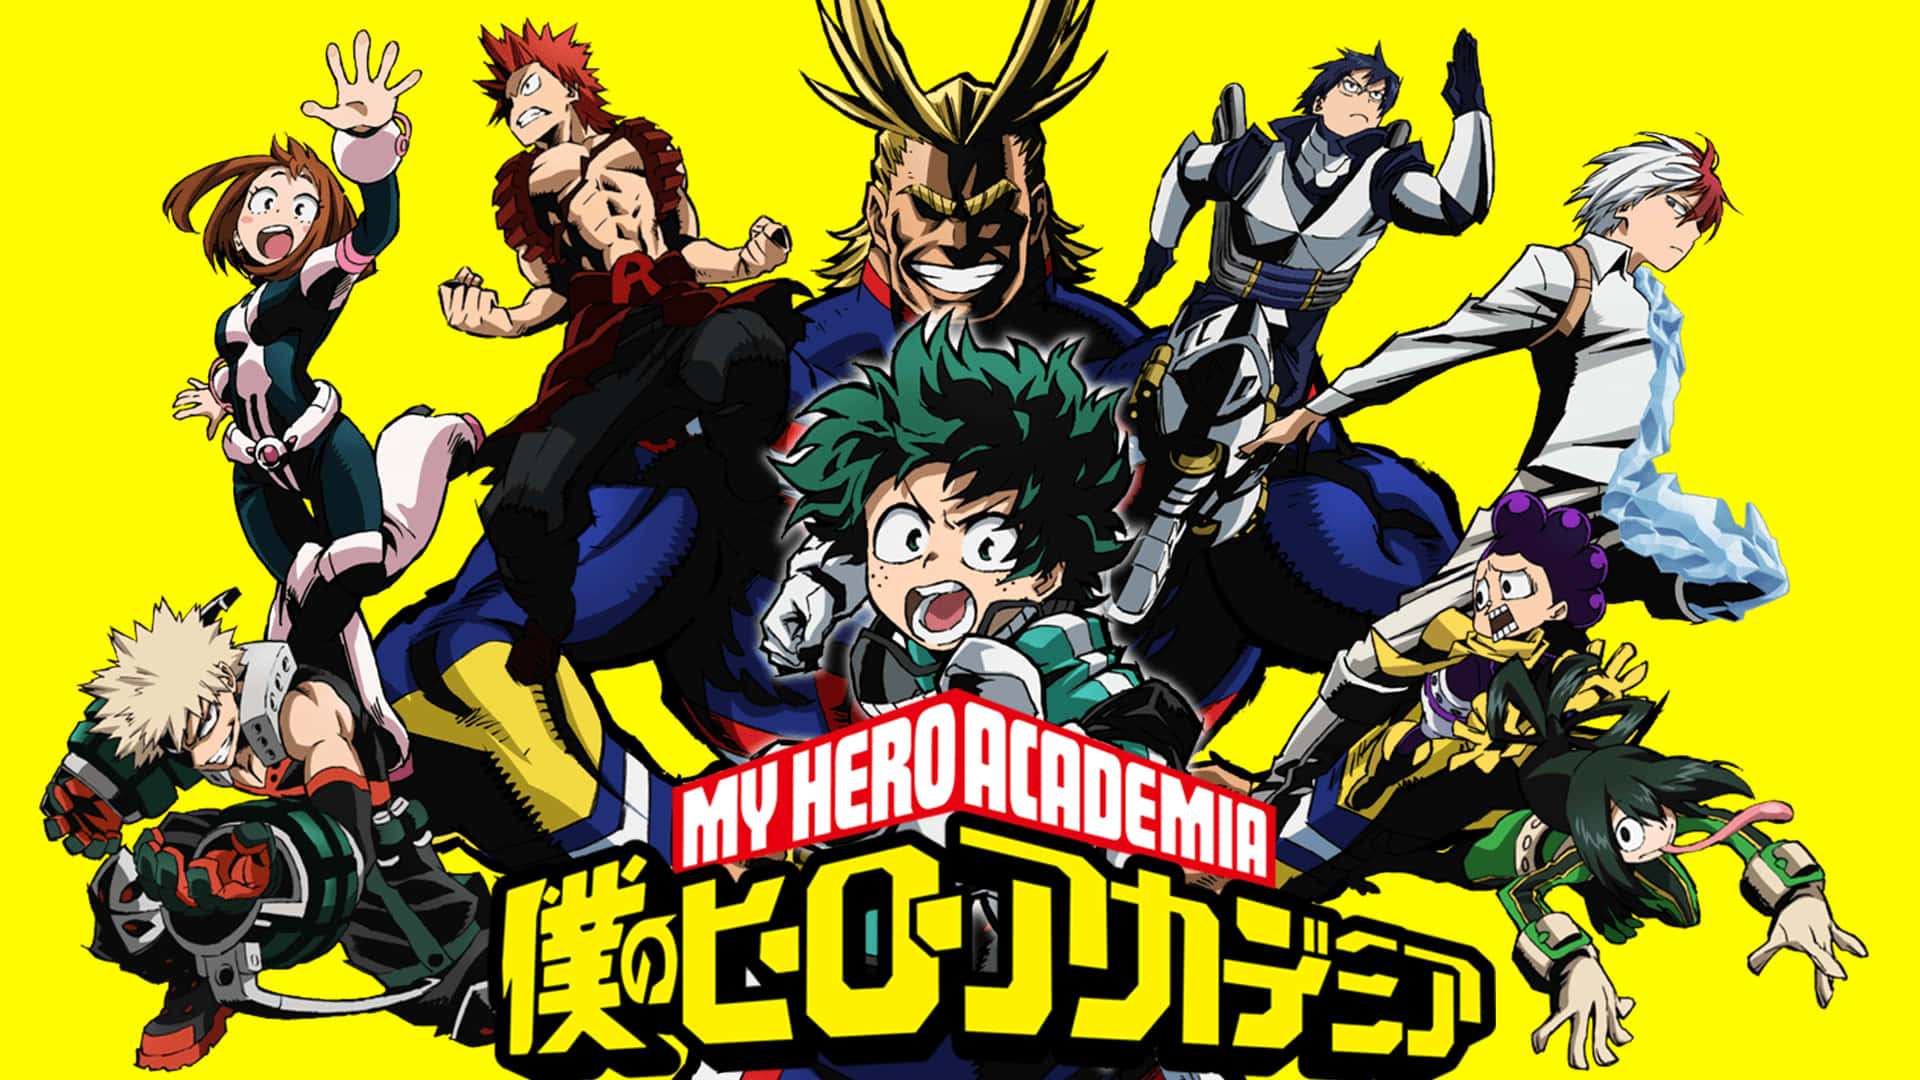 Explore the limits of your potential with My Hero Academia on an iPad Wallpaper